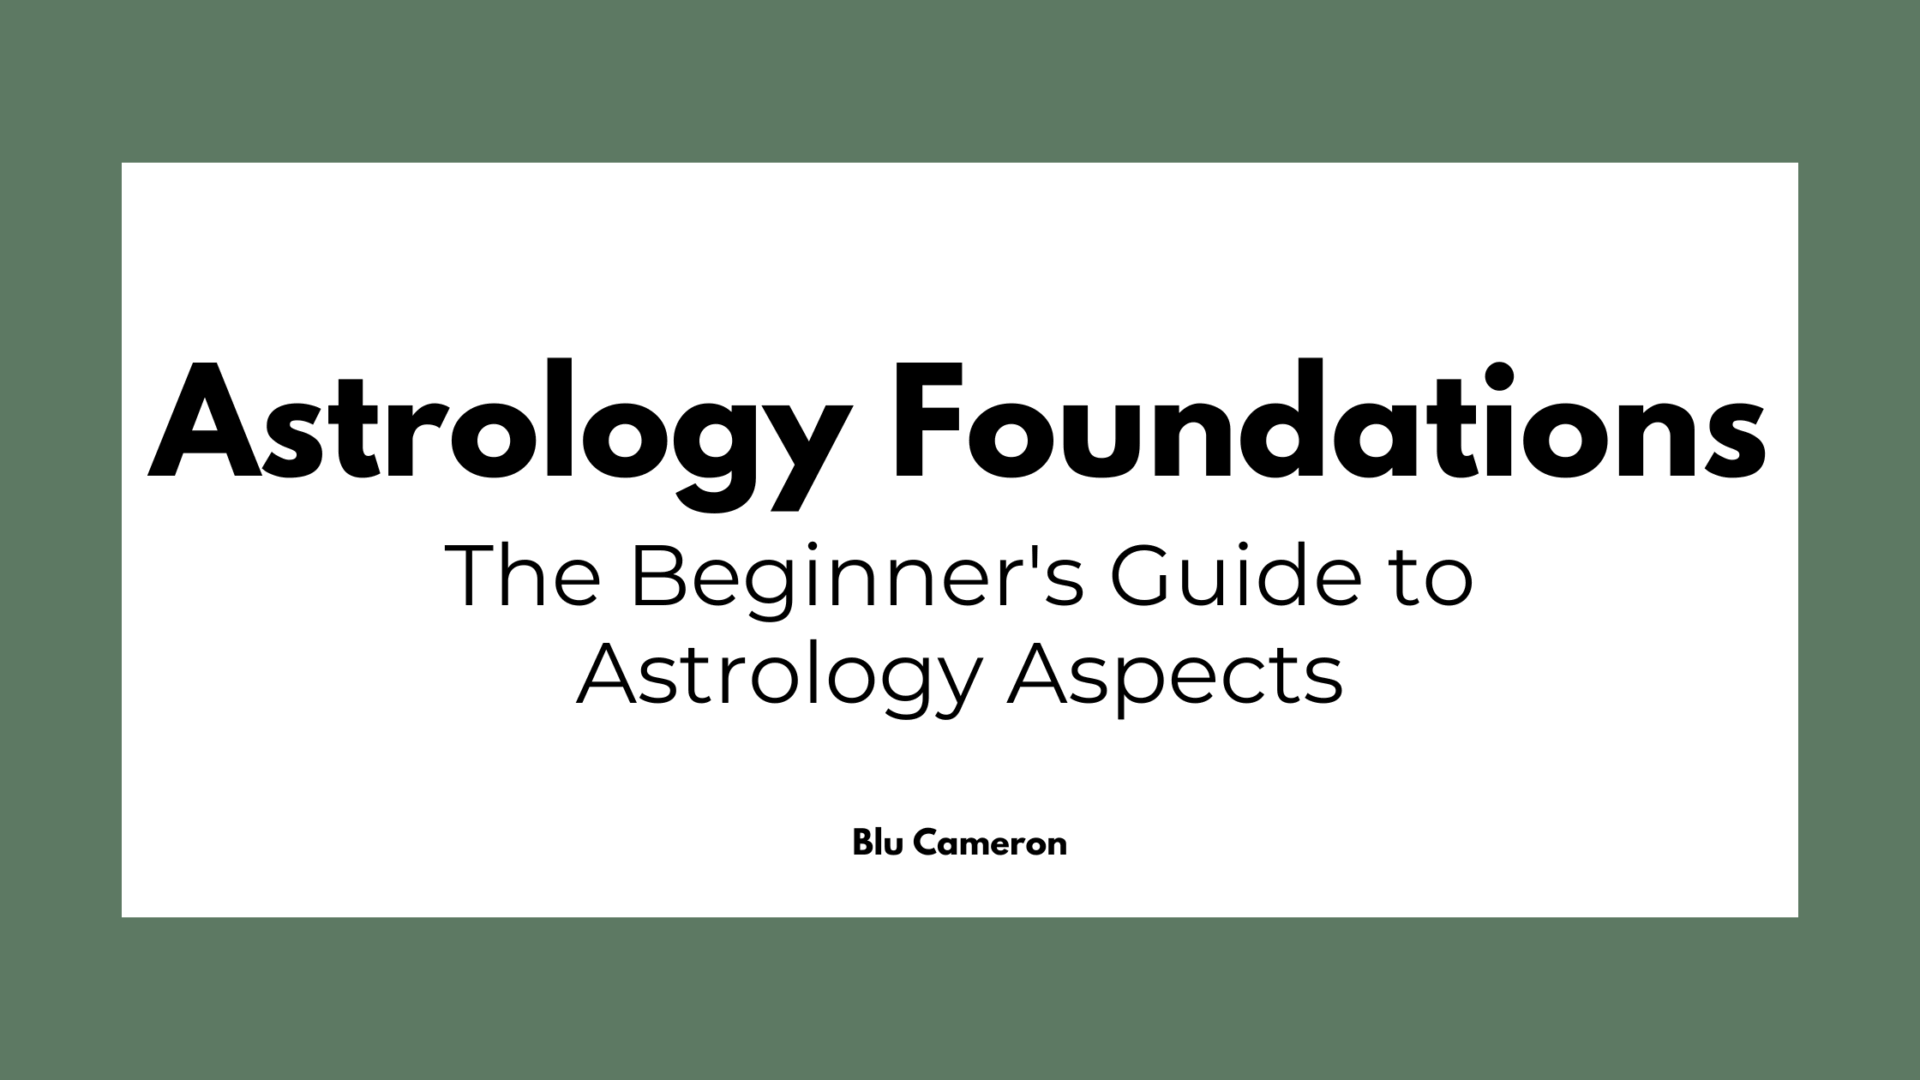 Black text against a white and green background reads: "Astrology Foundations, The Beginner's Guide to Astrology Aspects"